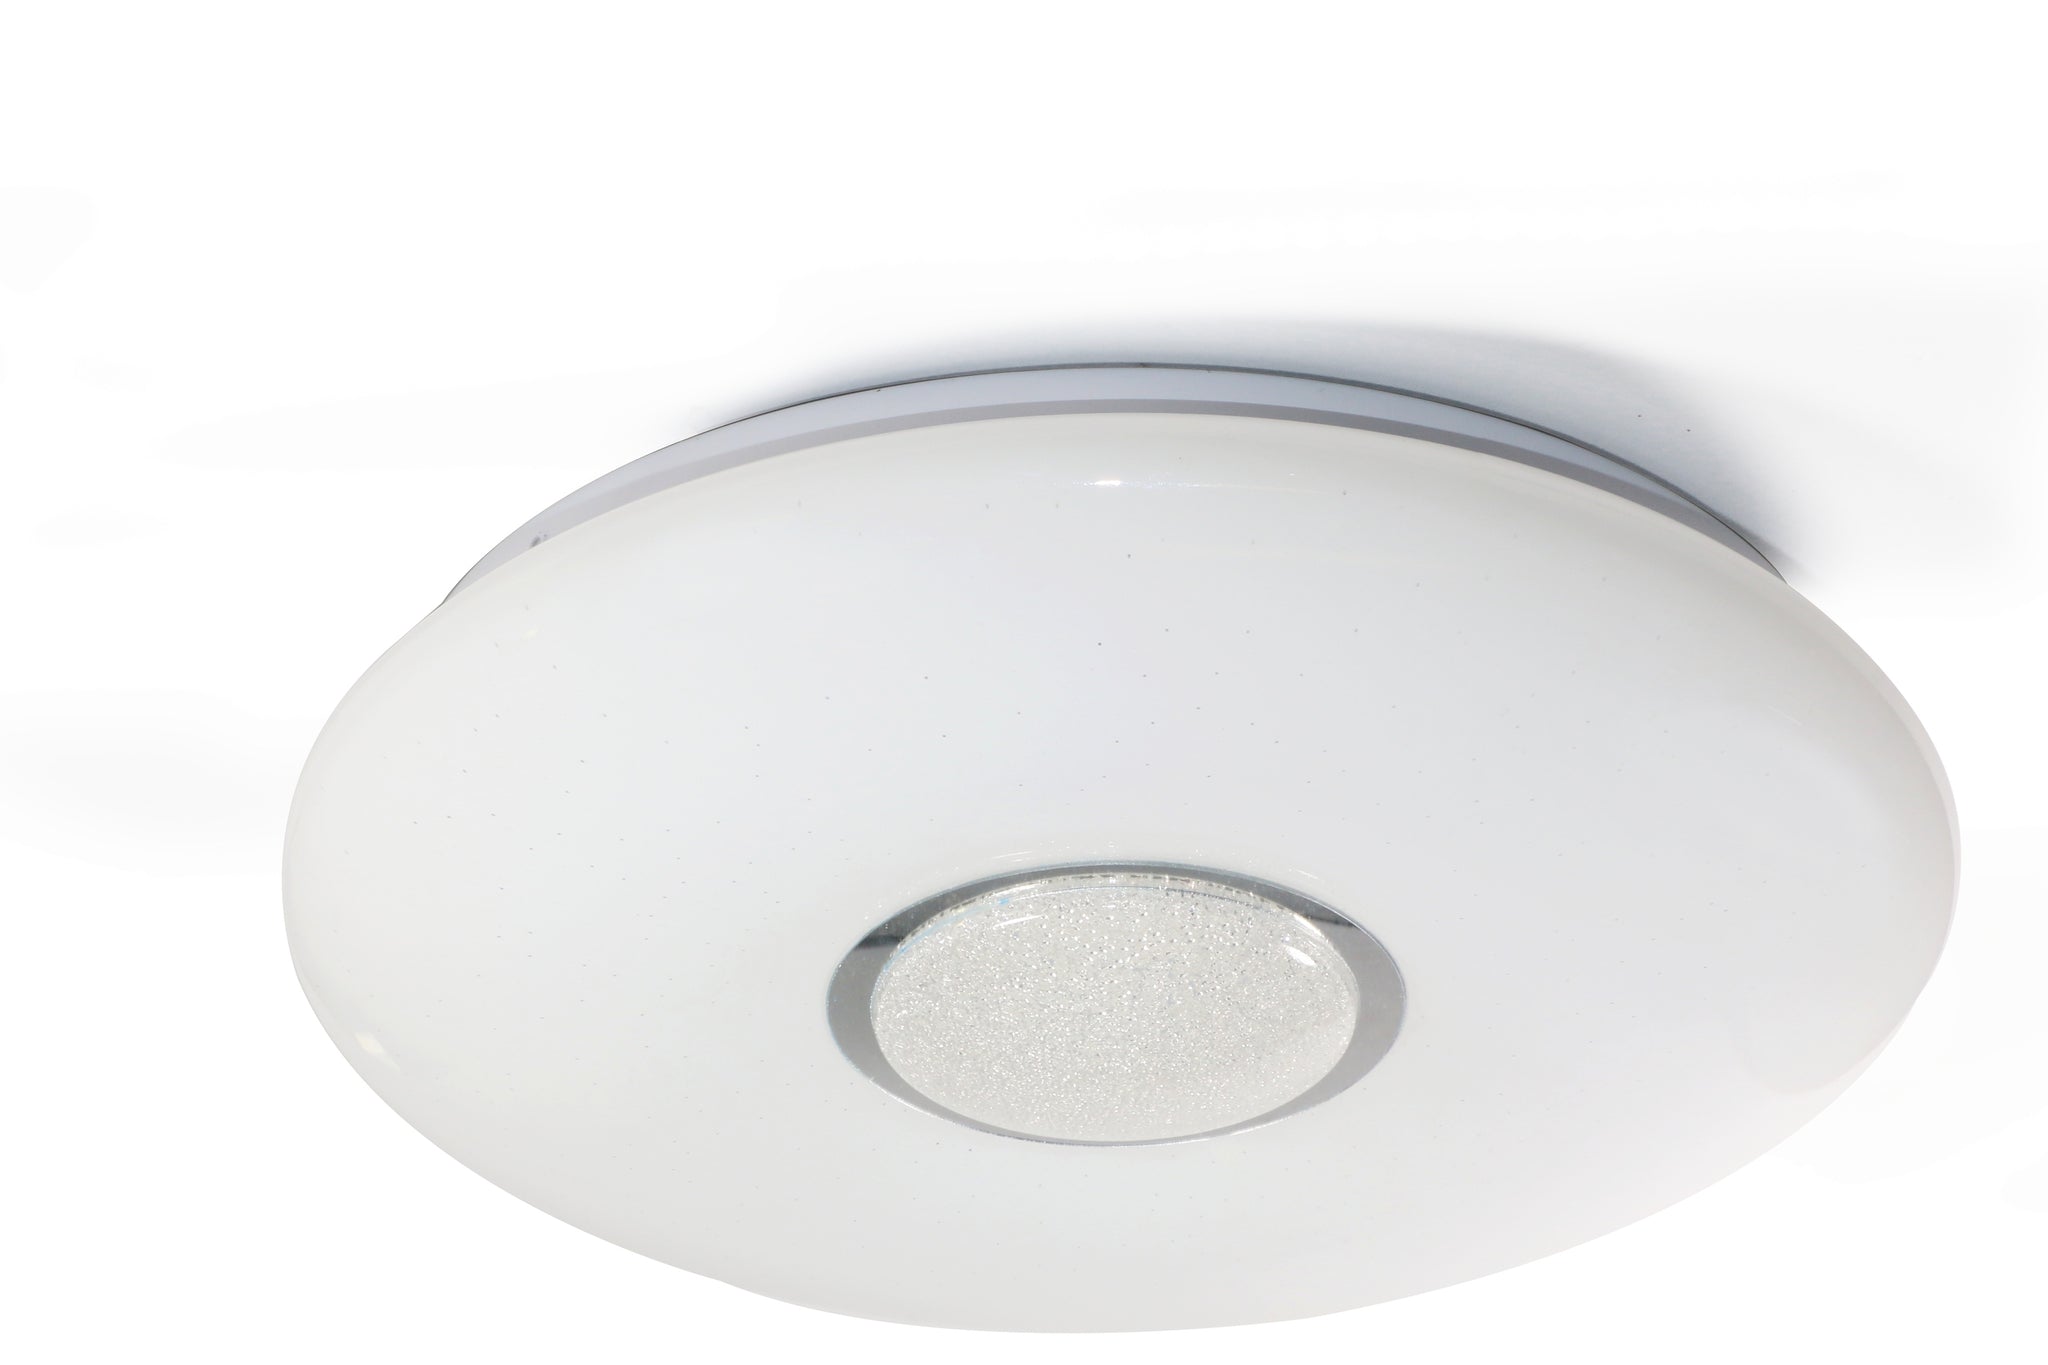 LED Smart Ceiling Light, 24 Watts RGB CCT 2700K-6500K, Dimmable, Remote Control Included